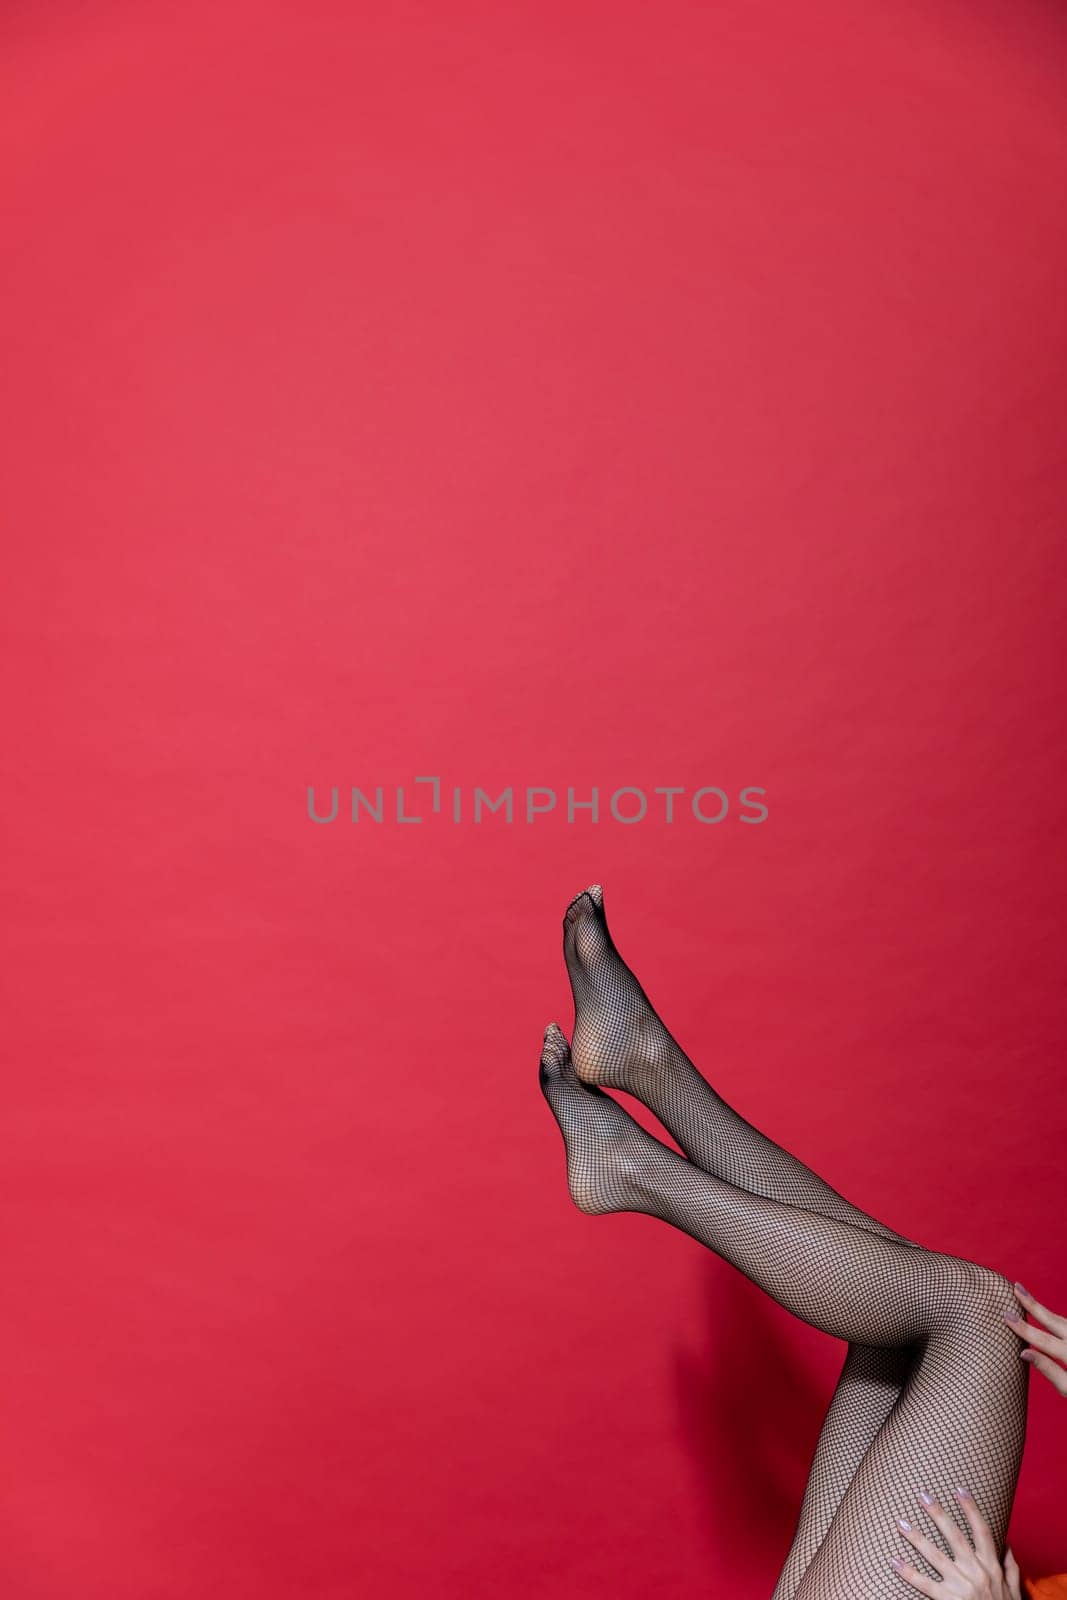 women's slender legs in mesh tights on a red background by Simakov